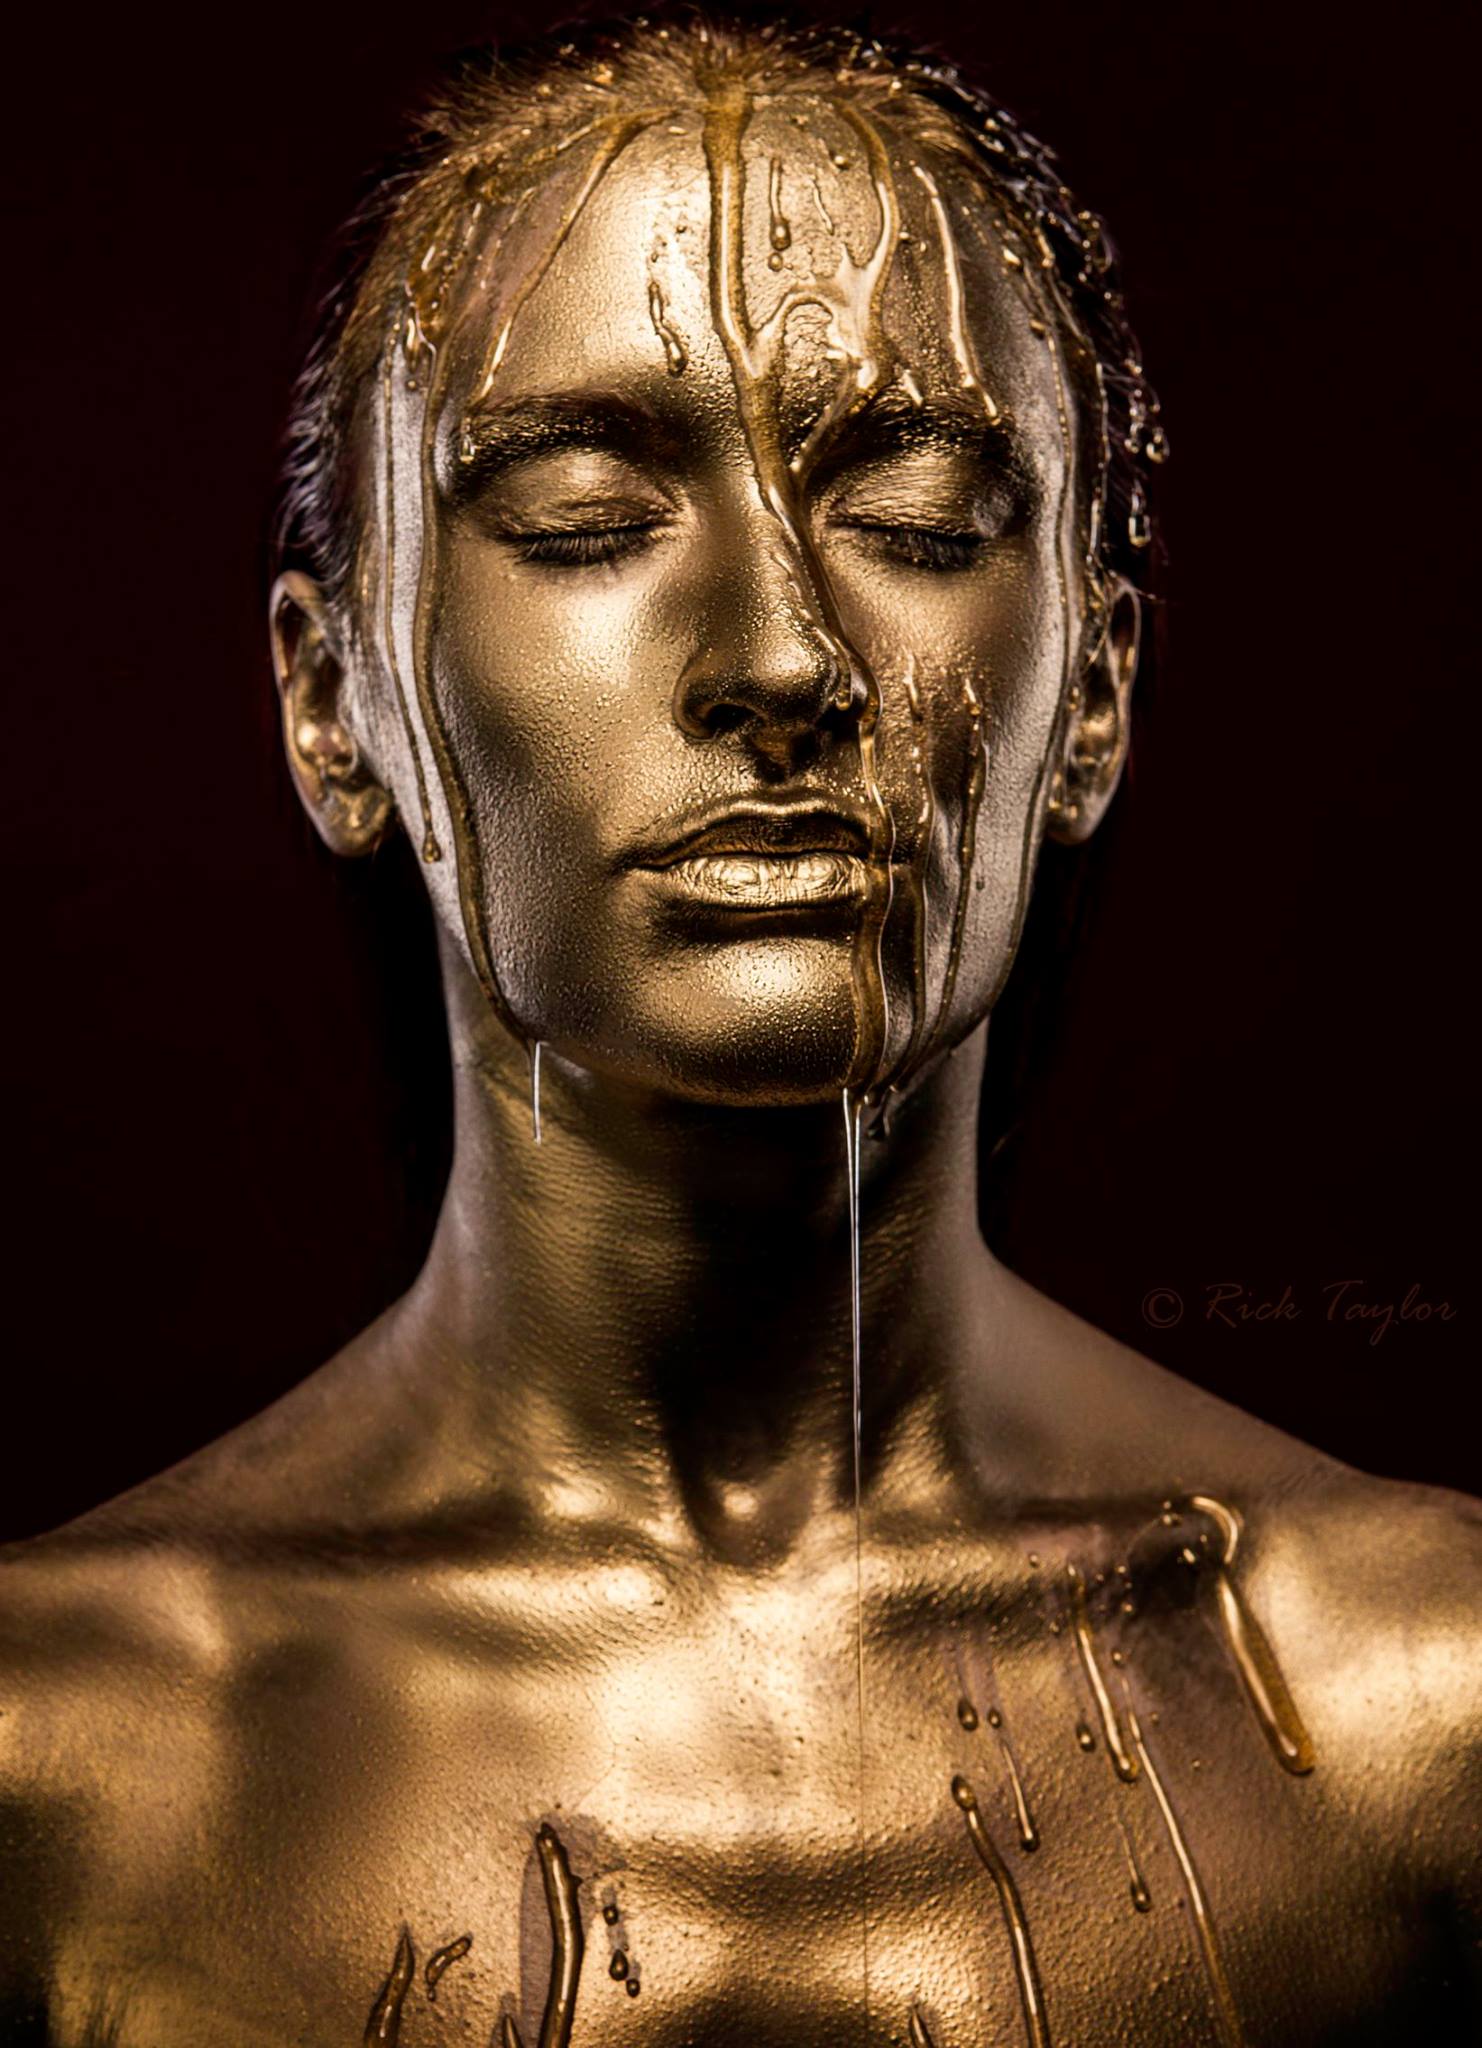 Gold face paint and makeup